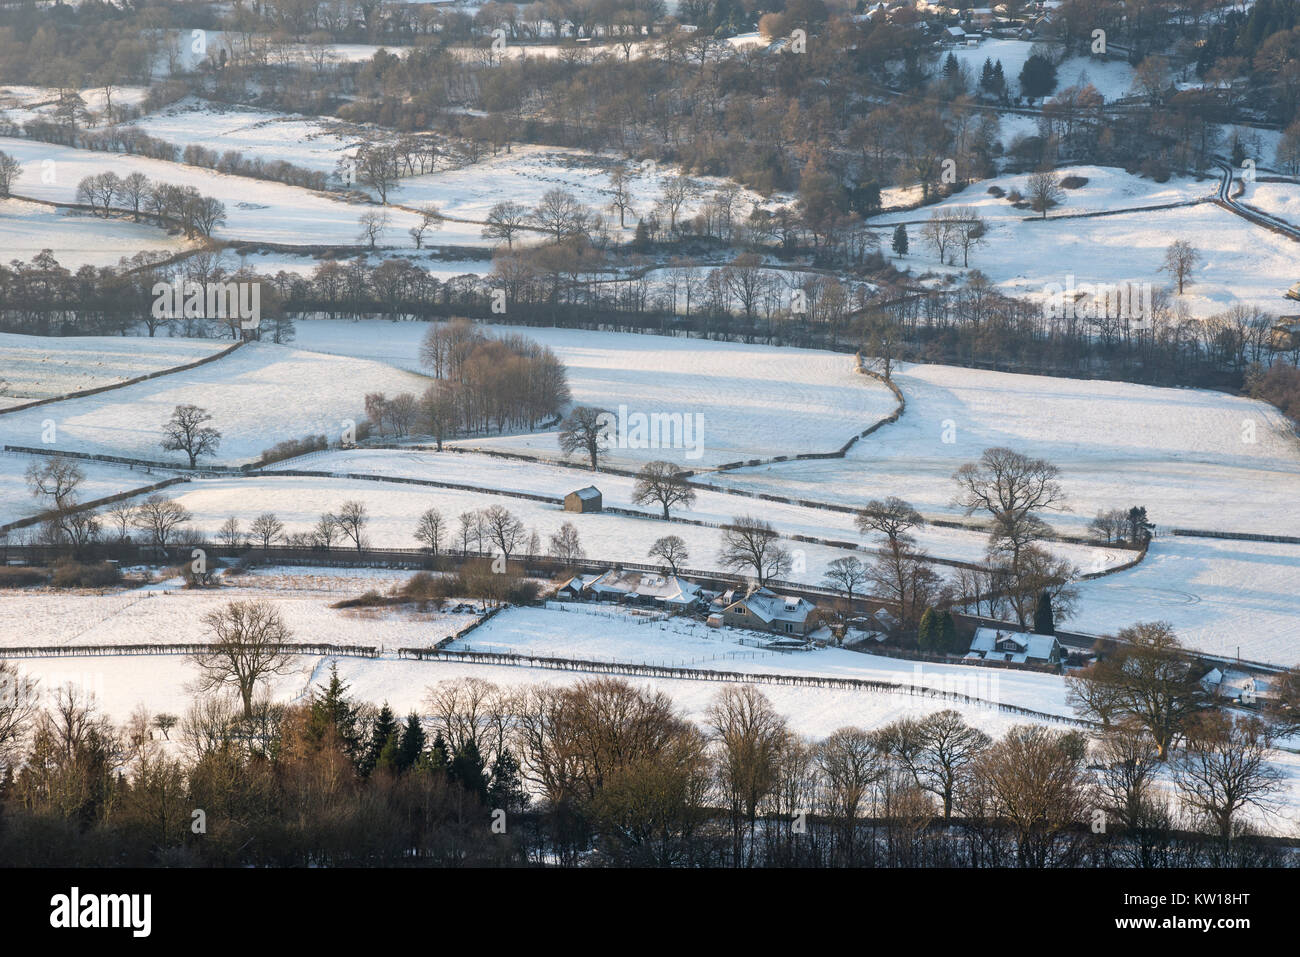 The English countryside on a snowy winter morning. Bamford, Derbyshire, England. Stock Photo